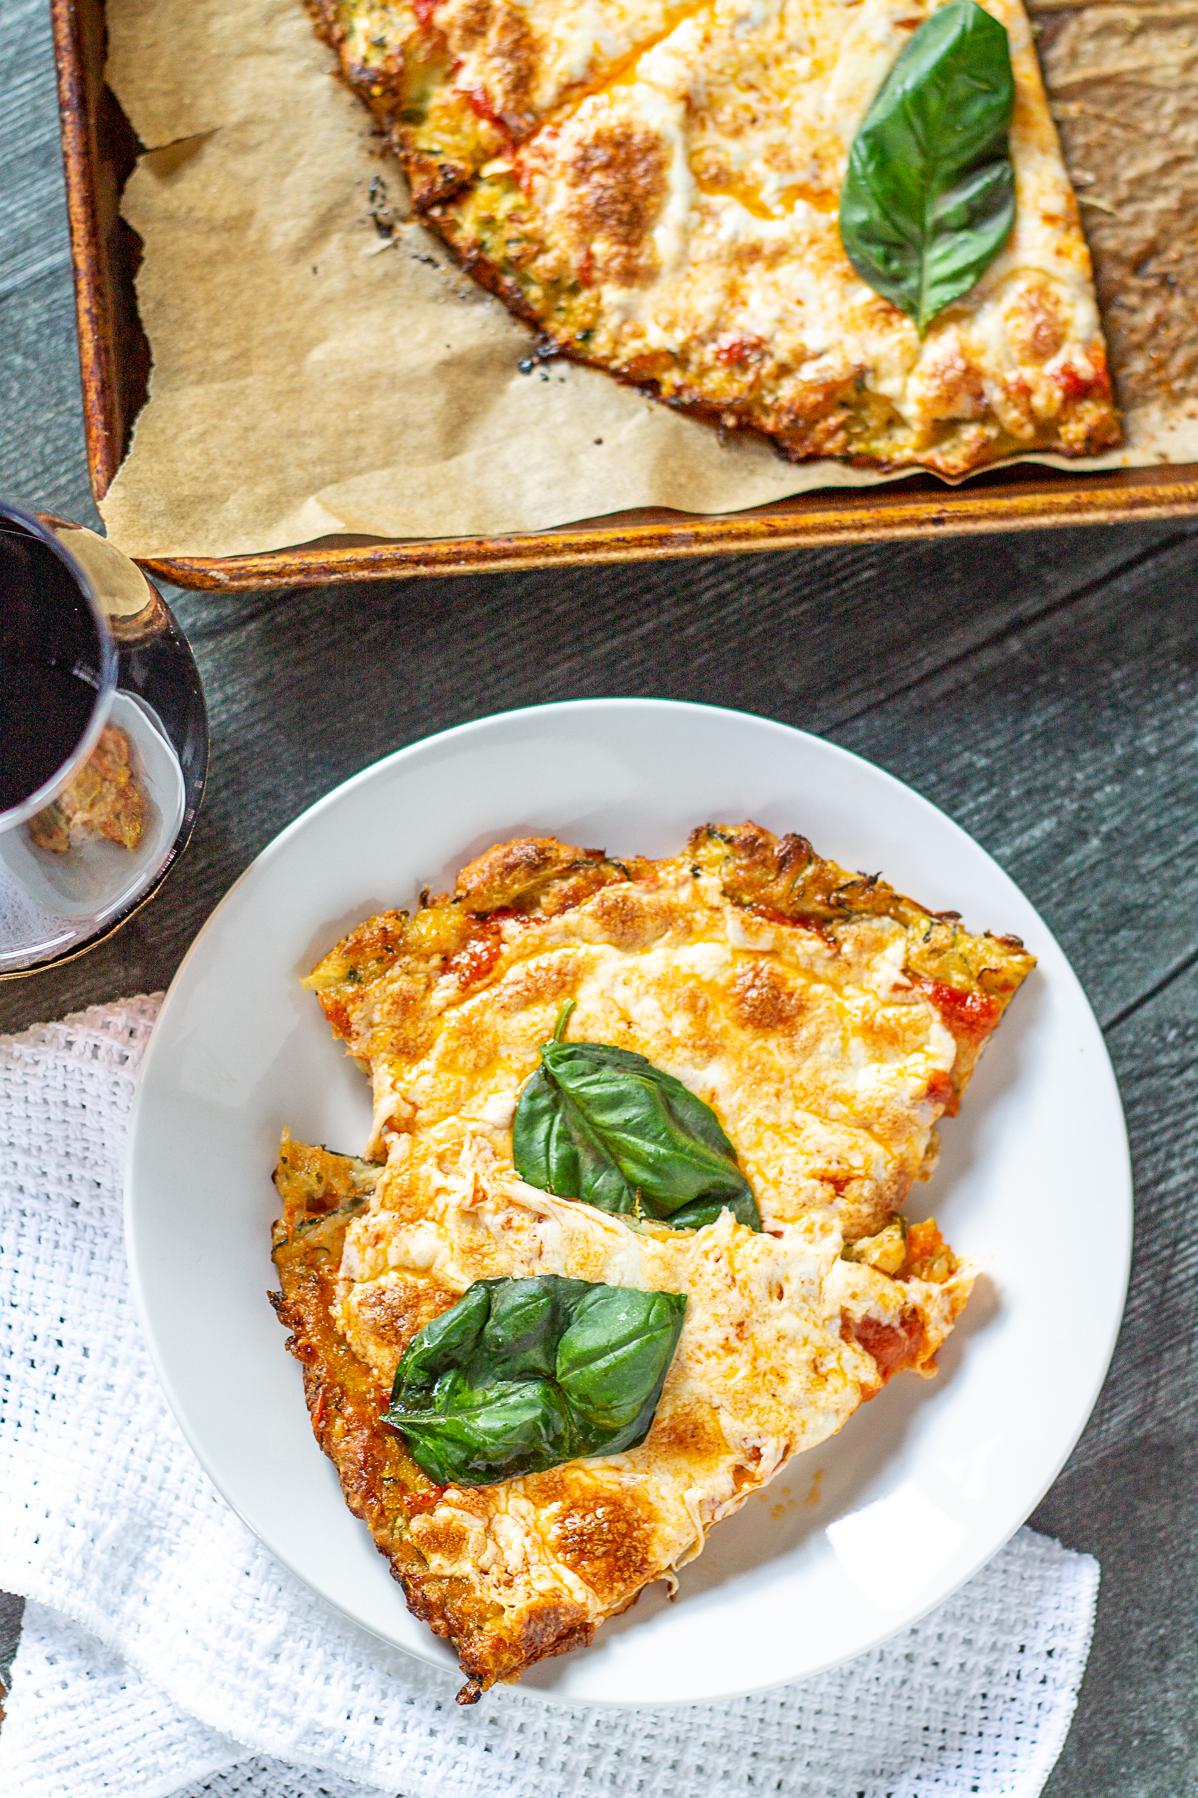  This zucchini pizza crust is a game-changer for gluten-free pizza lovers!